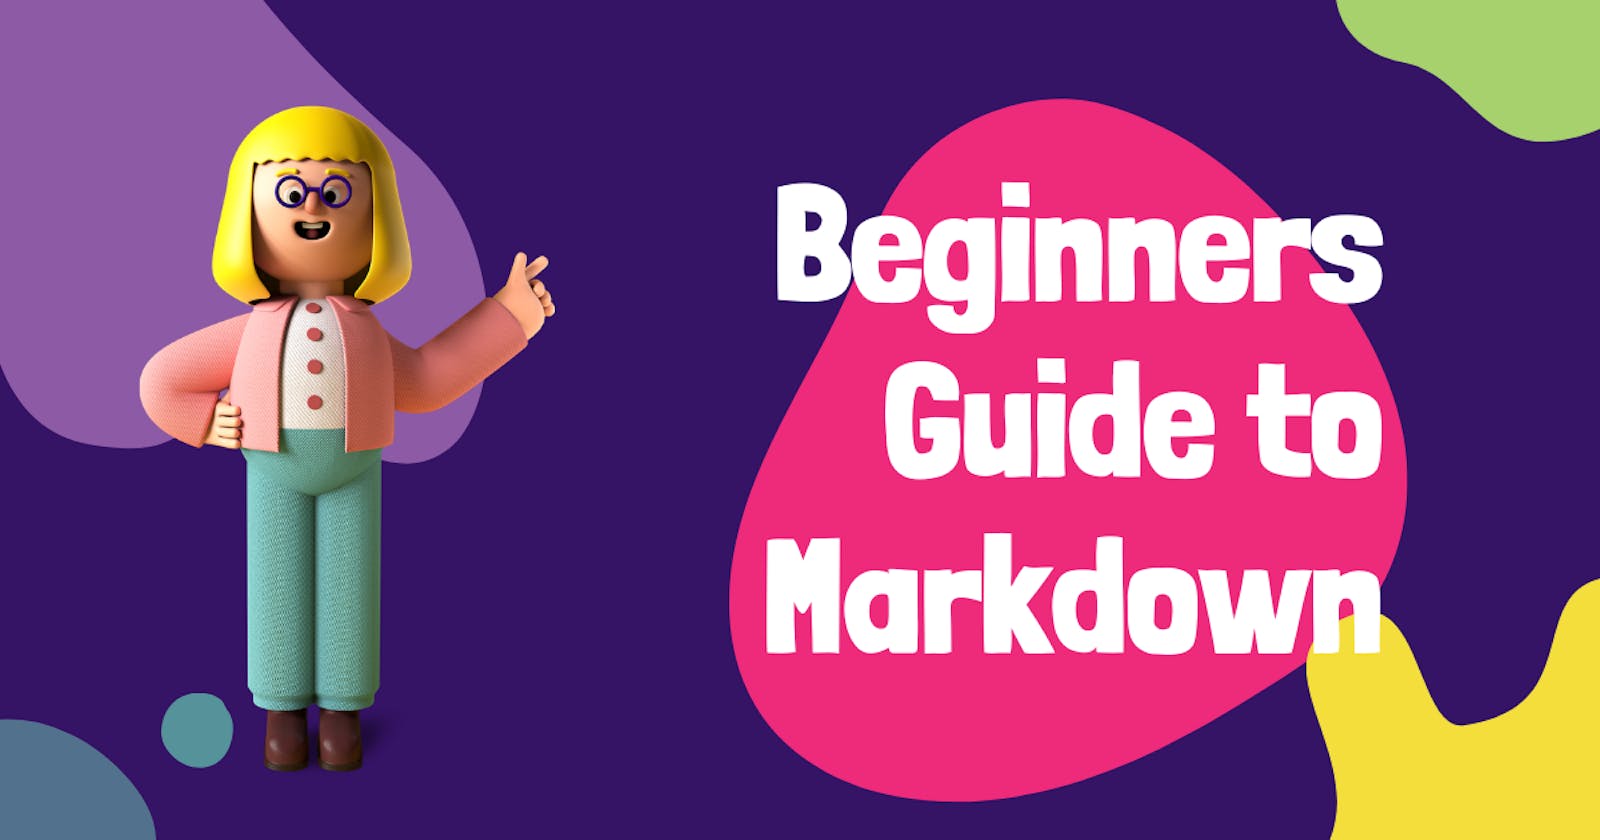 Beginners Guide To Markdown